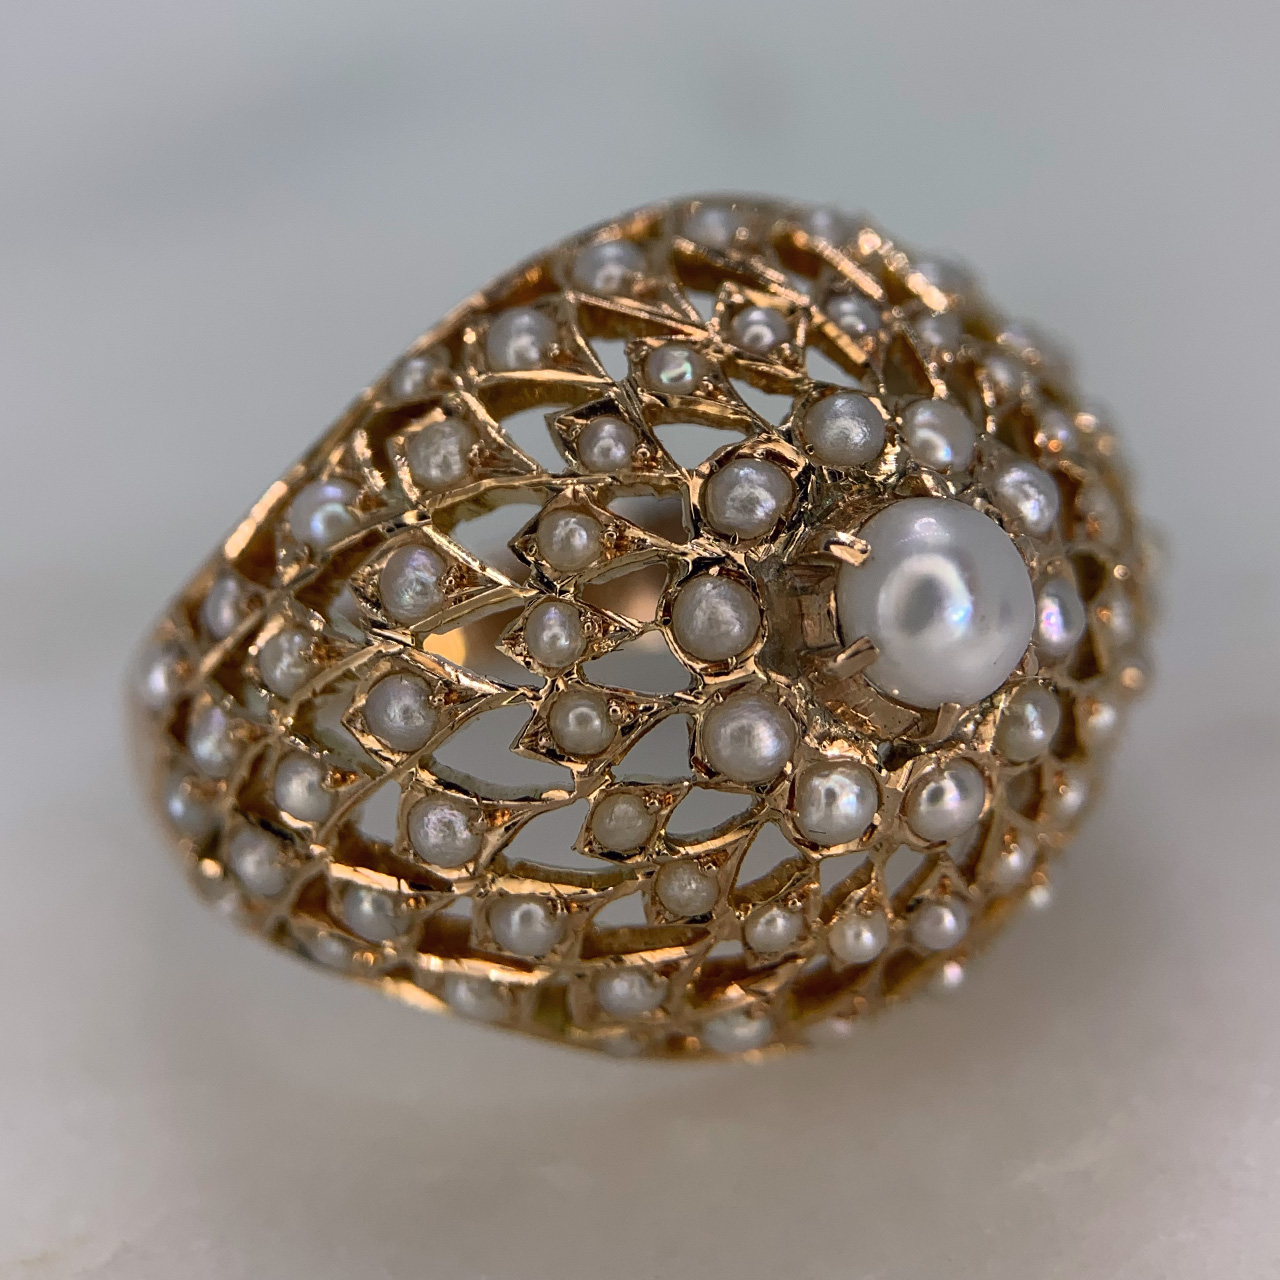 Unusual Pearl Bombe Ring in stamped 9ct Rose Gold. The ring head is domed and pierced in shape, and set with half pearls. The ring has one central pearl at 4.45mm in diameter and is surrounded by 6 bands of half pearls equating to 81 set pearls. Exquisite condition. 